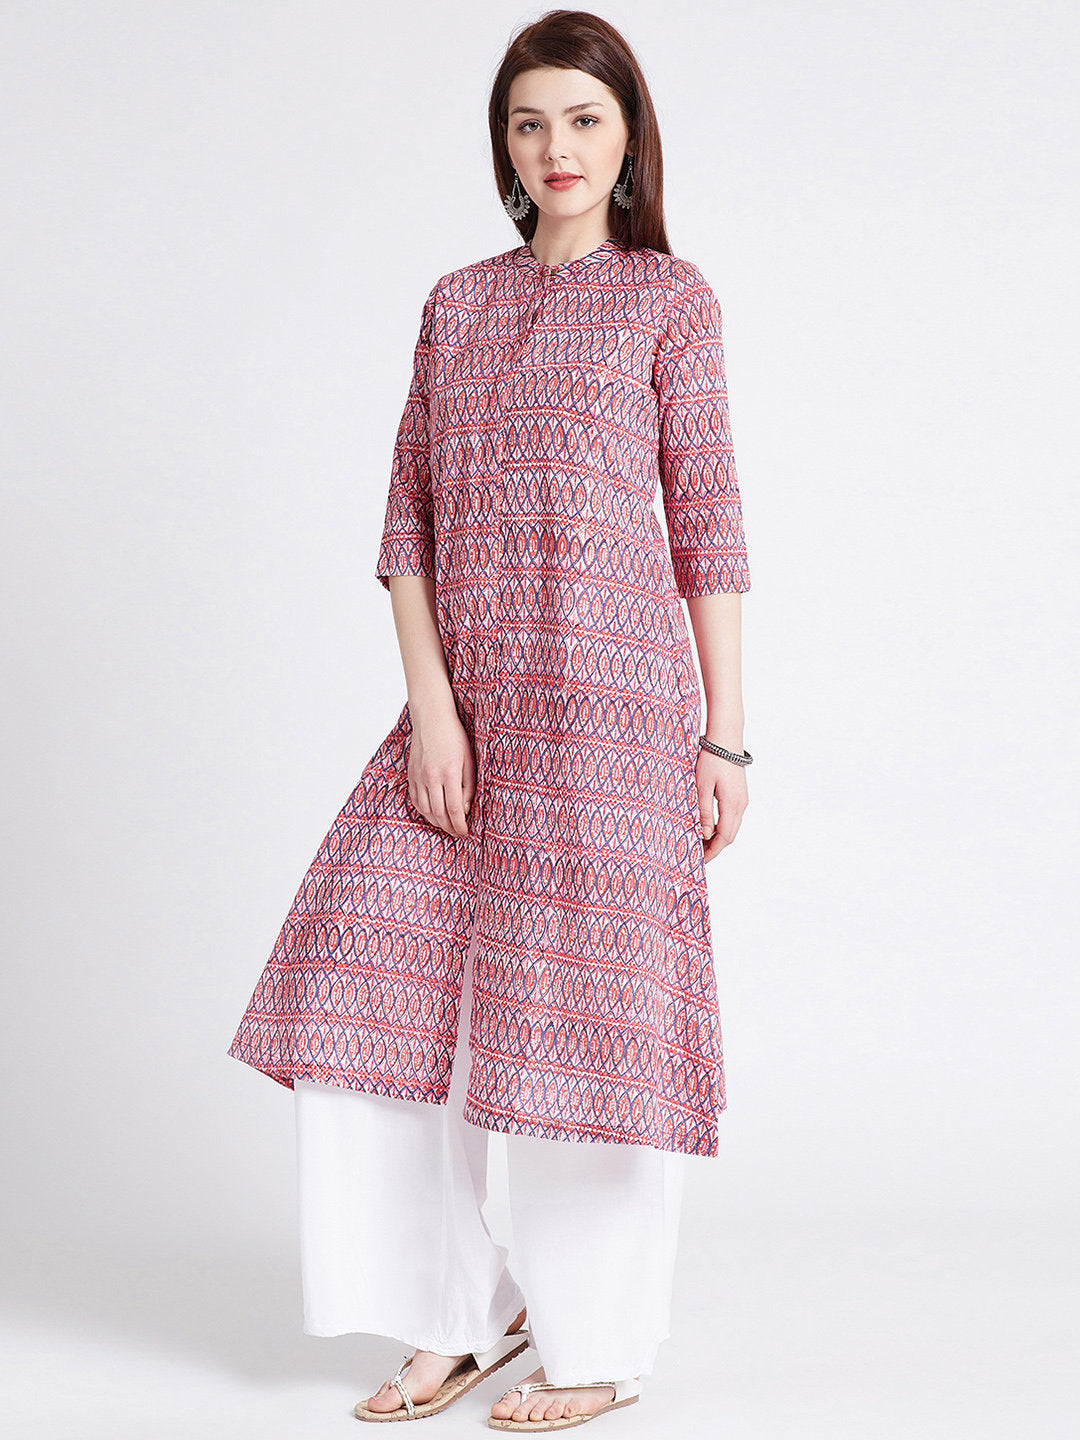 Hand block printed long kurta with front slit in reddish pink colour with pockets with button detailing on front